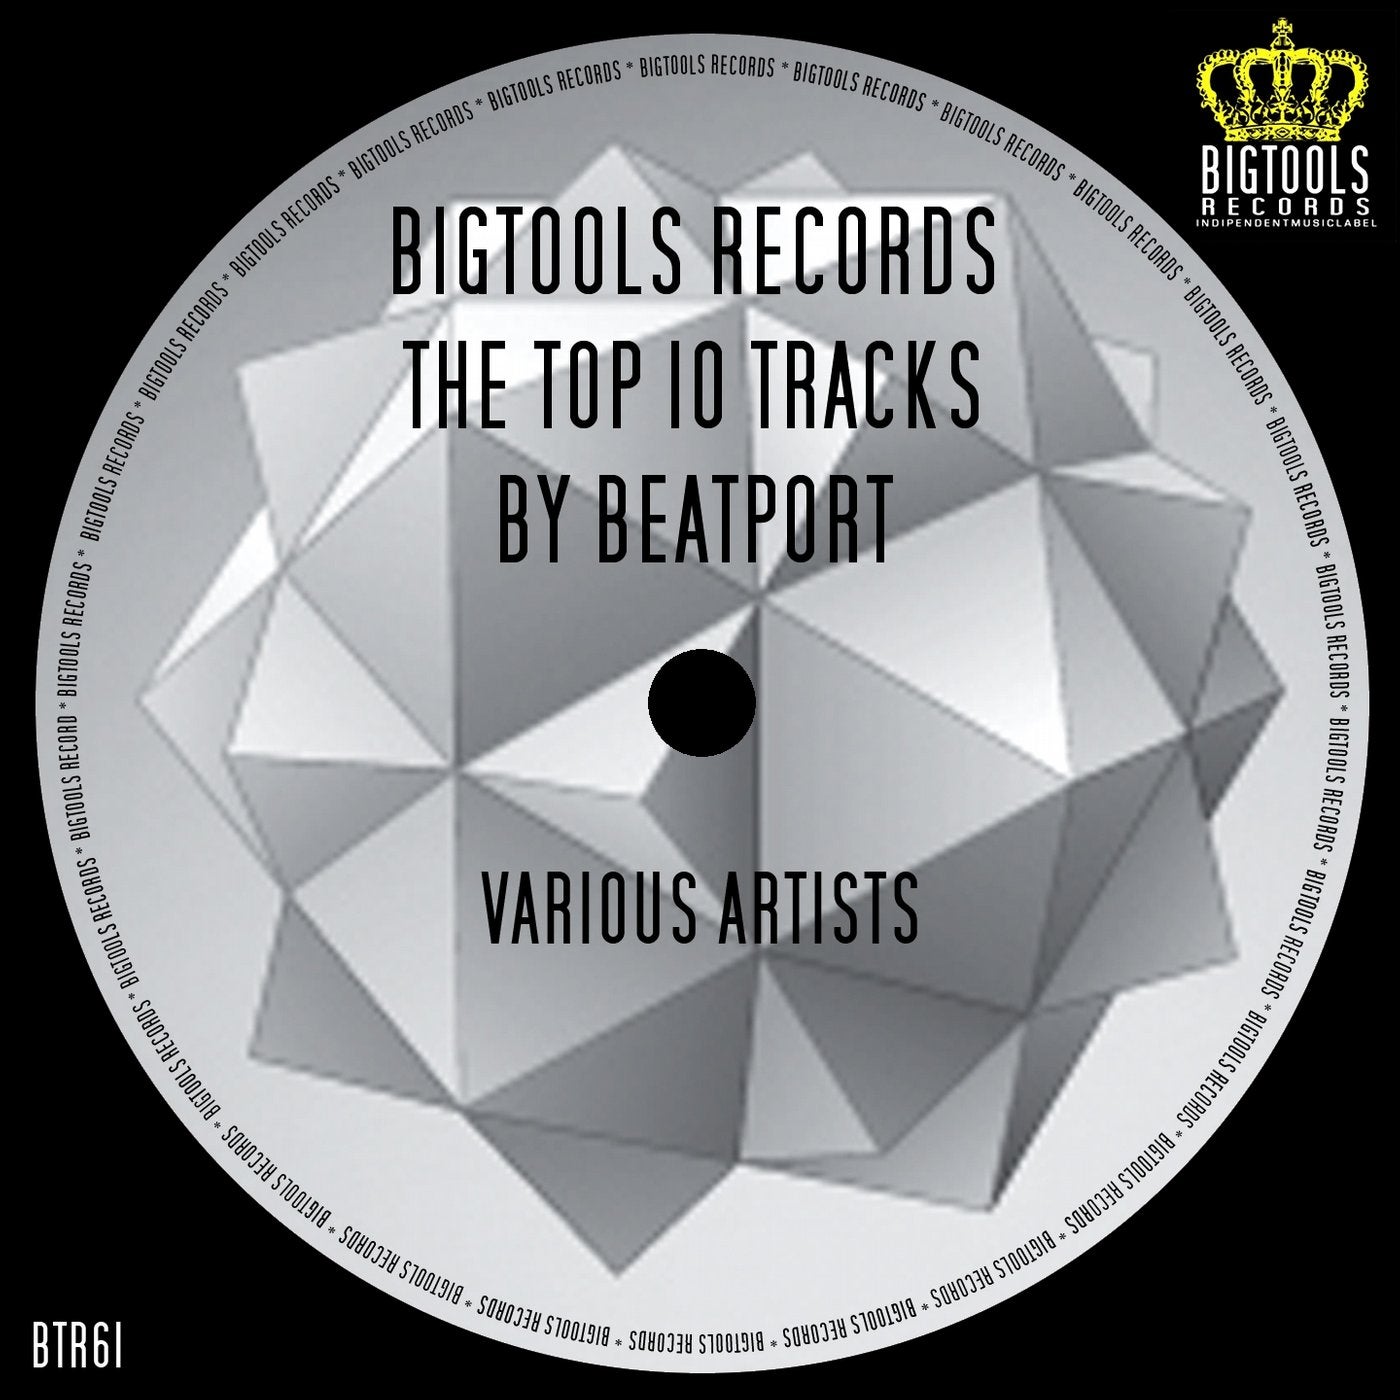 Bigtools Records: The Top 10 Tracks by Beatport